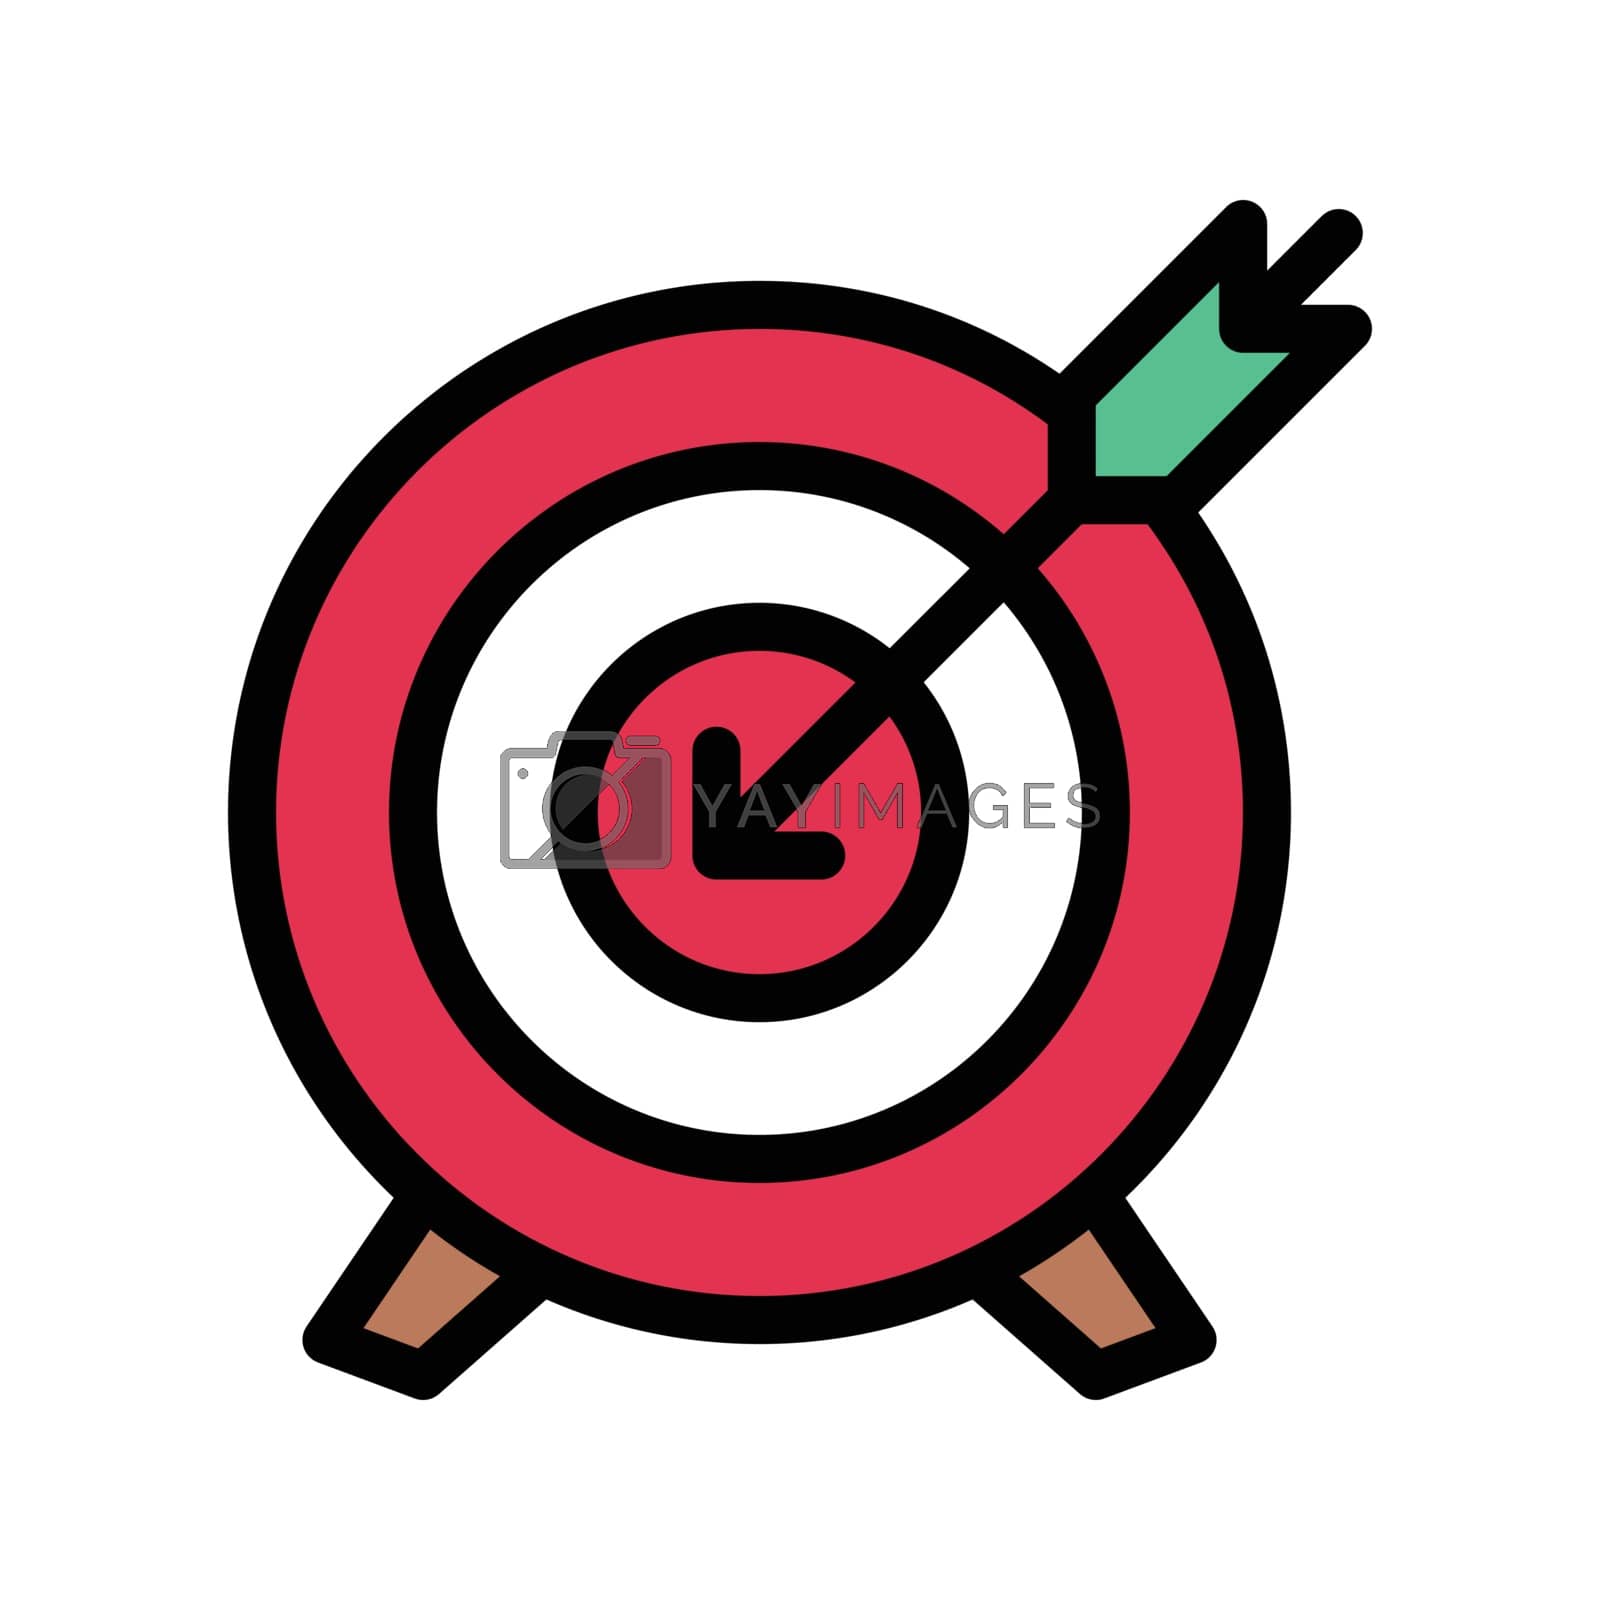 Royalty free image of focus by vectorstall